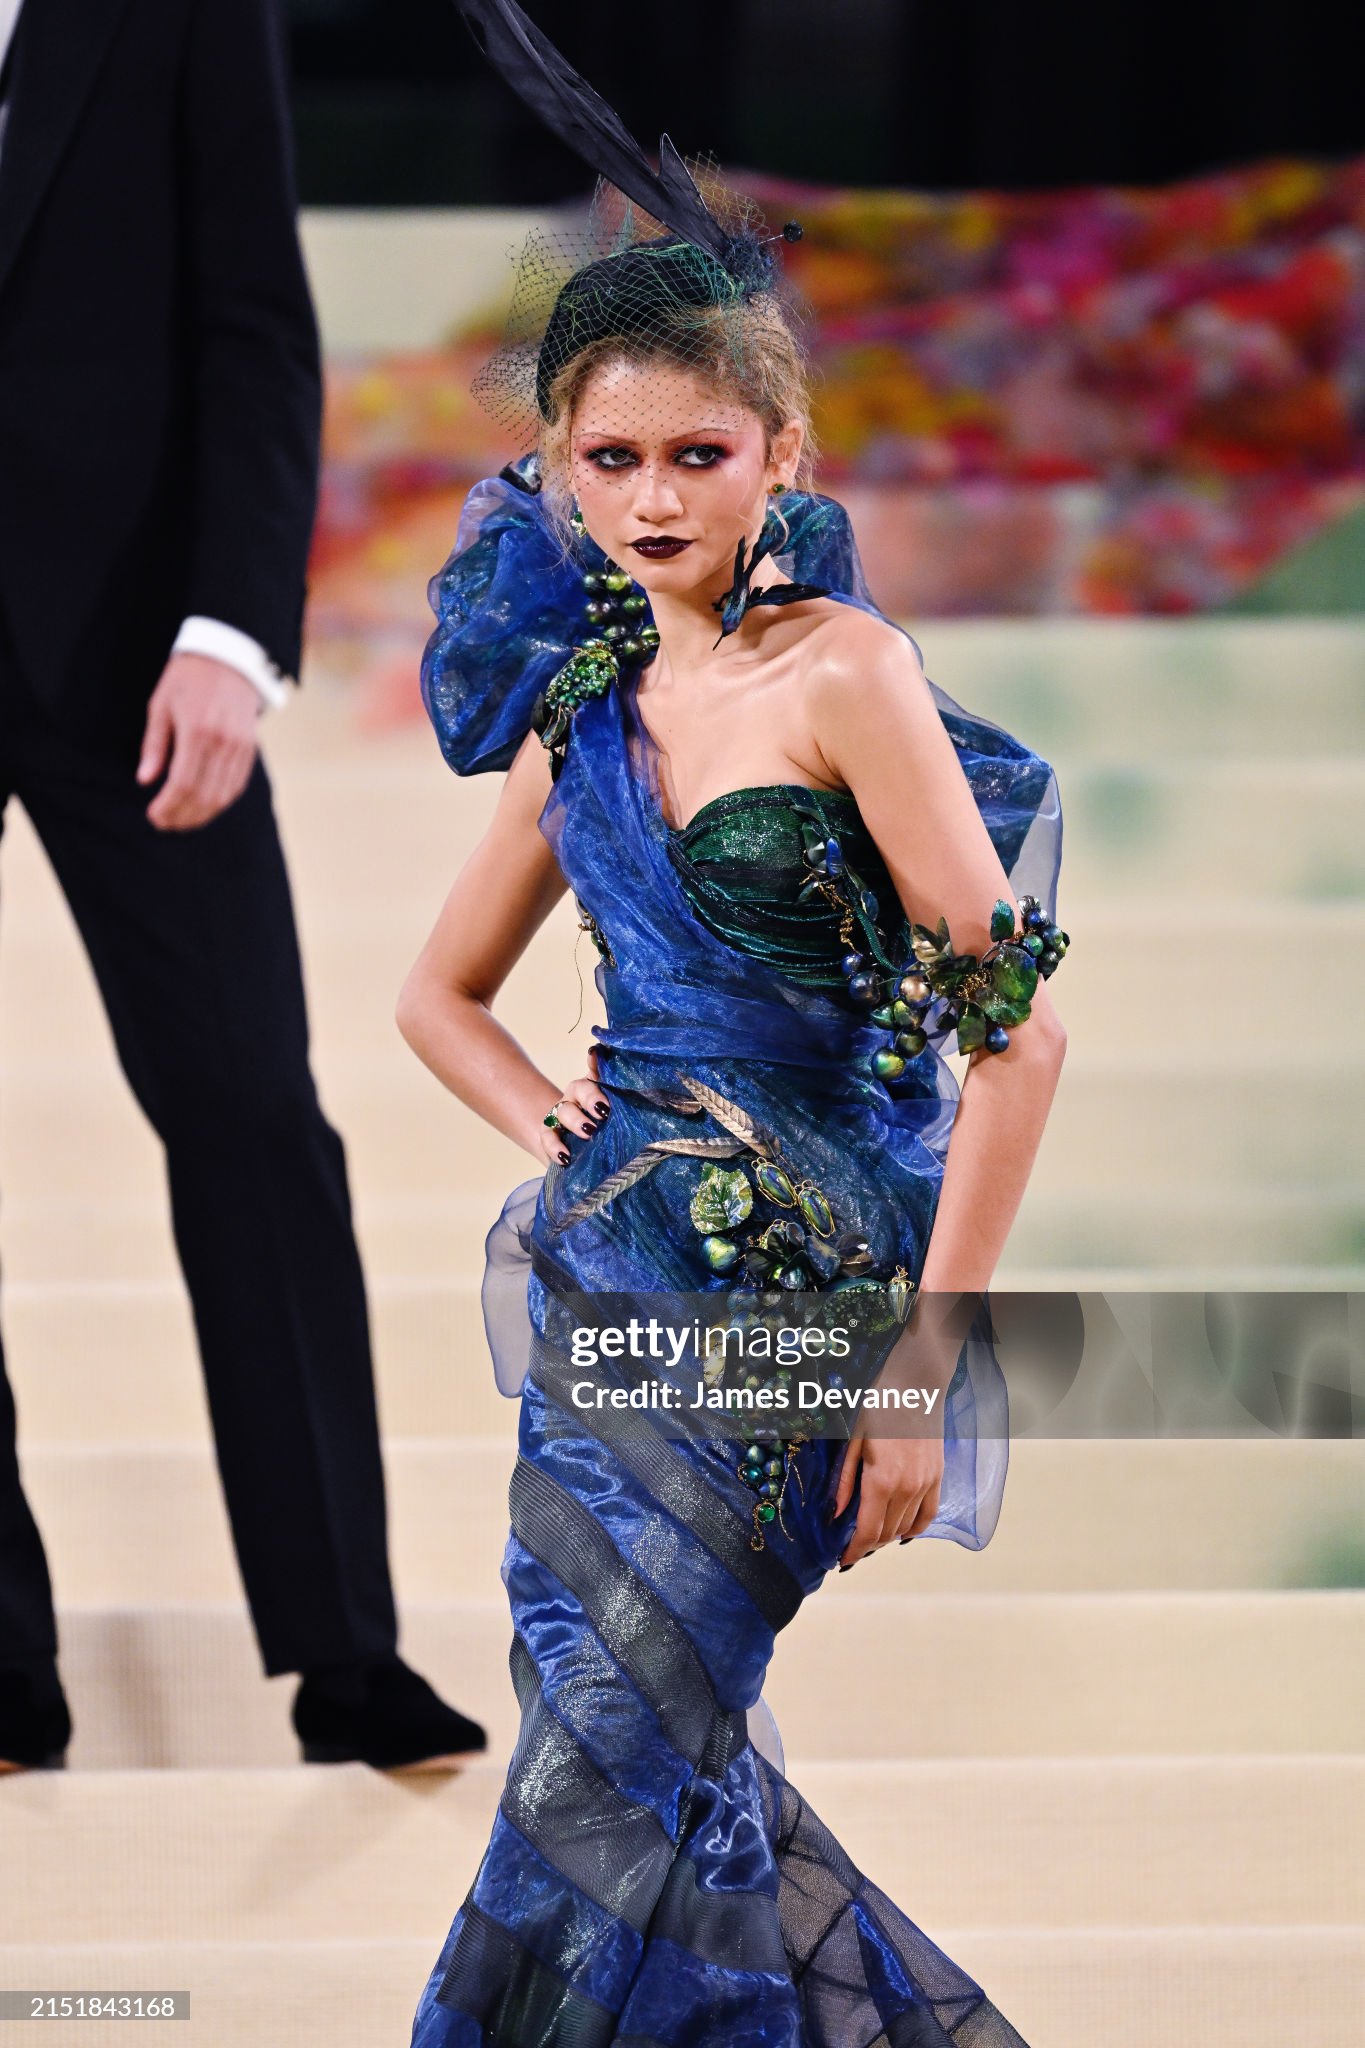 gettyimages-2151843168-2048x2048.jpg